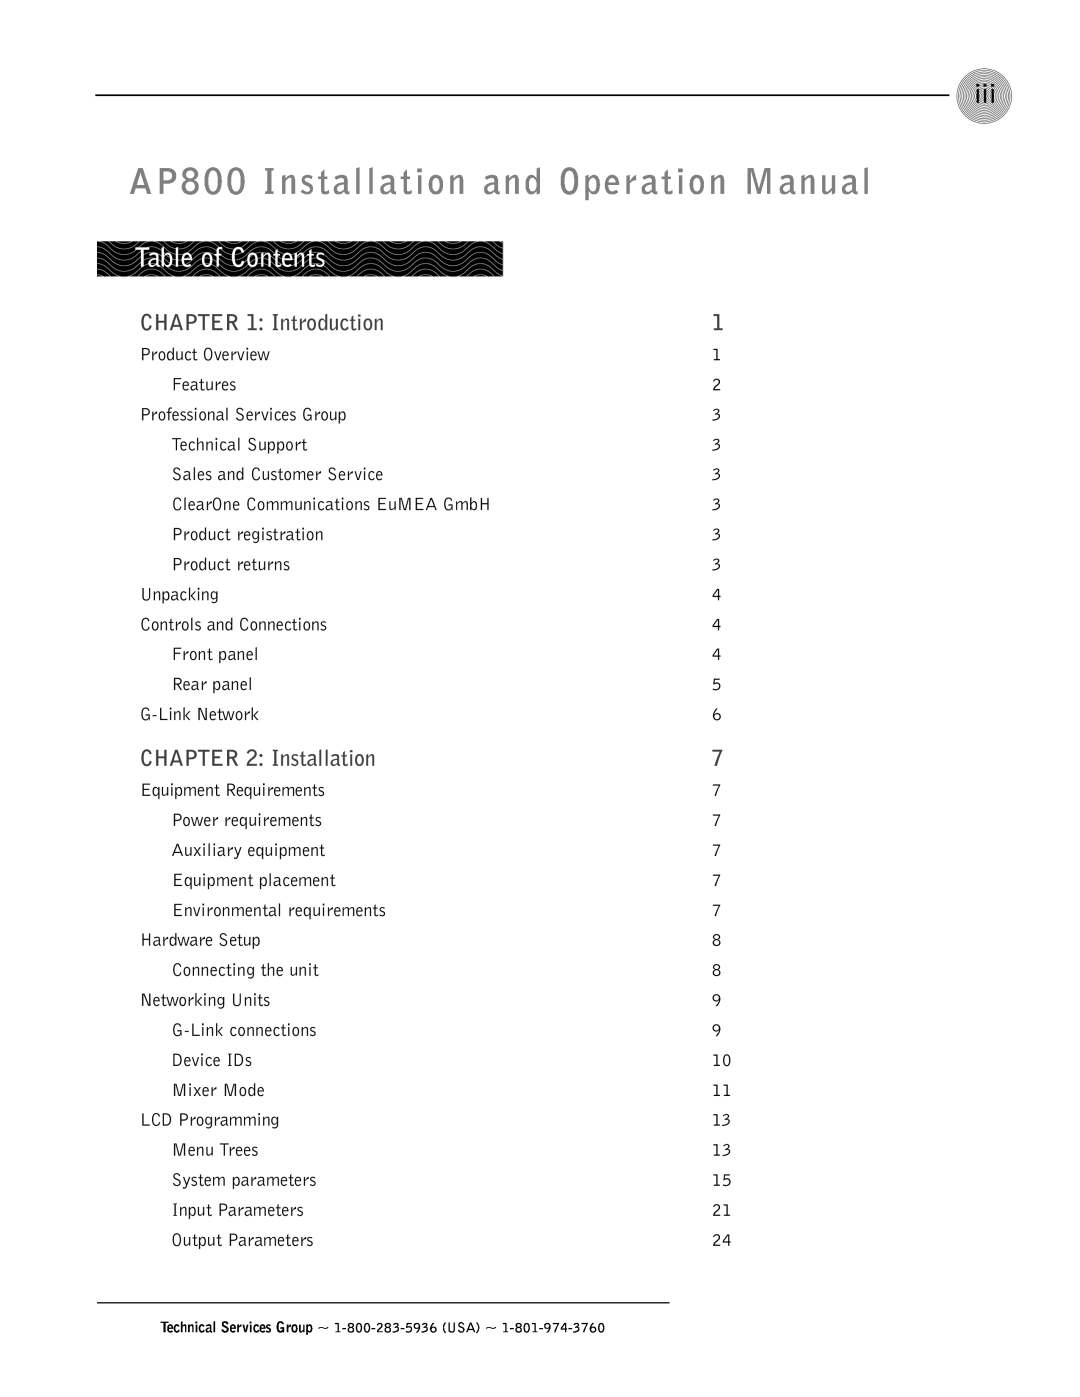 ClearOne comm operation manual Table of Contents, Introduction, AP800 Installation and Operation Manual 